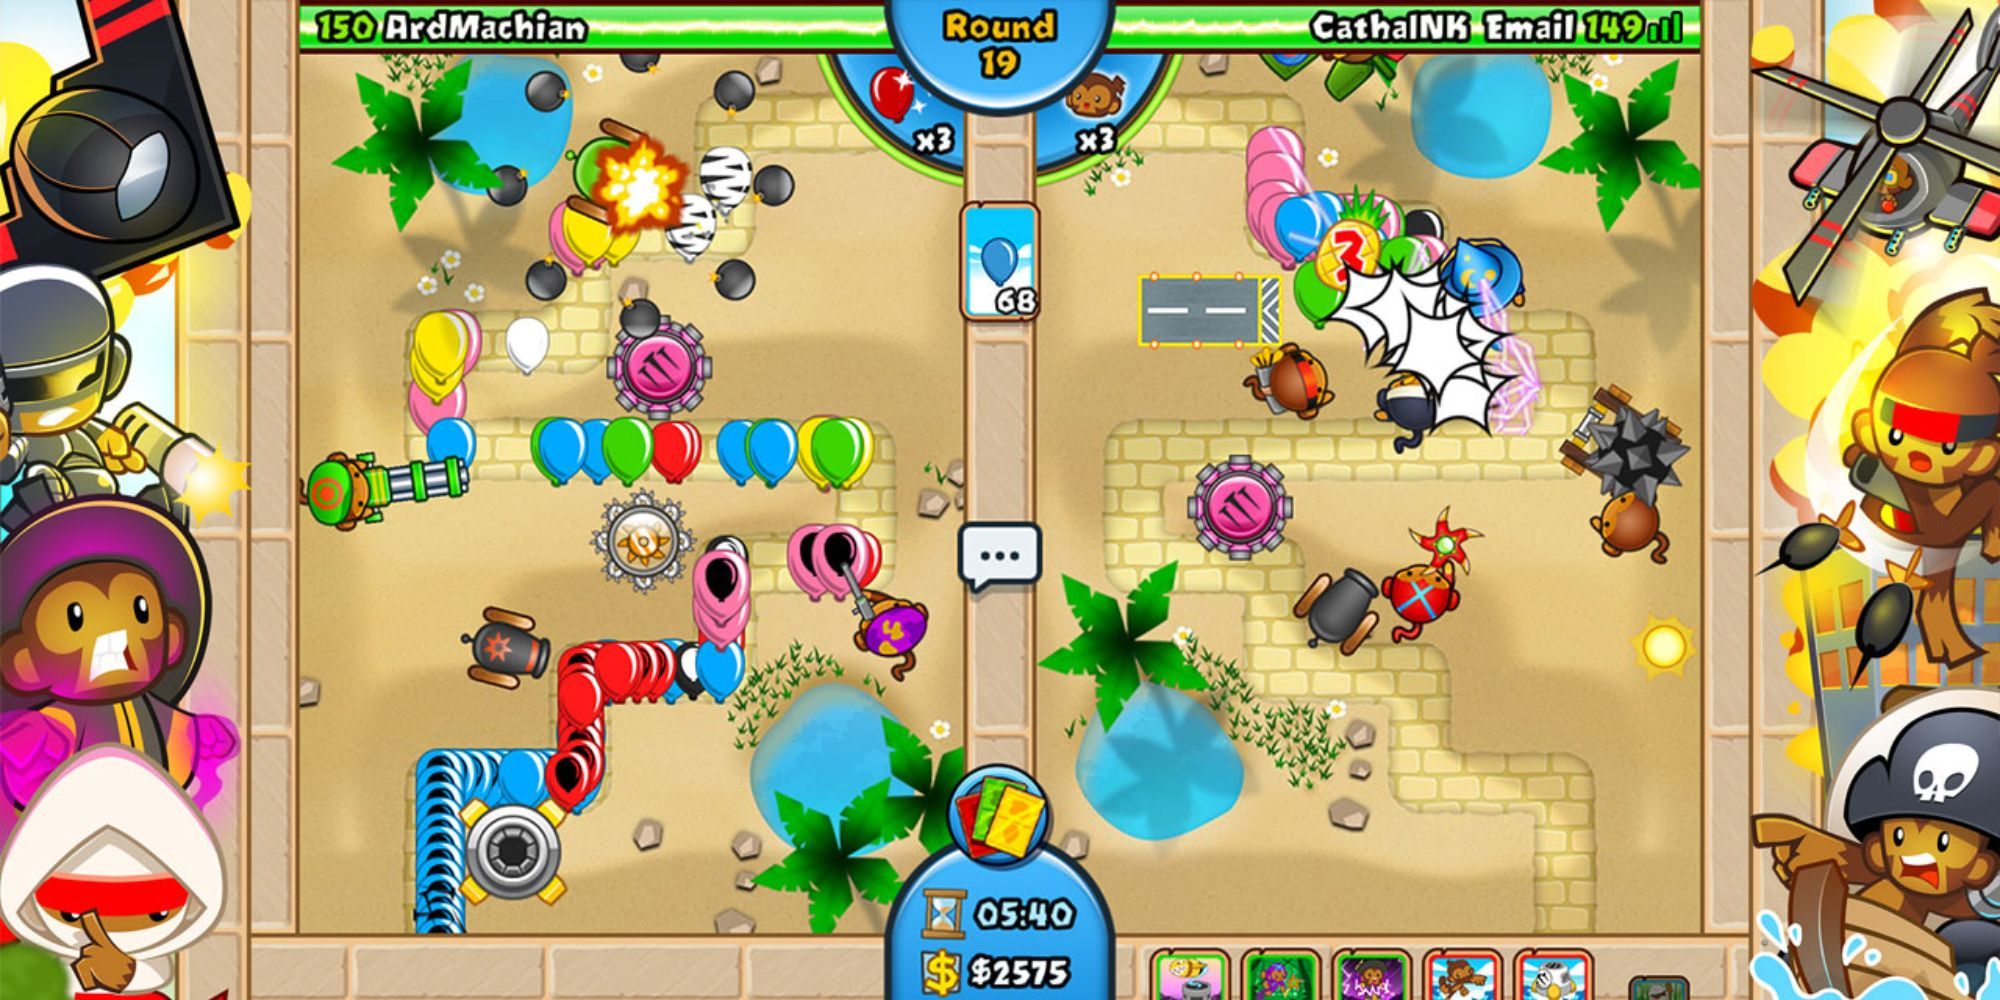 Bloons TD Battles colorful battle screen with money and time display